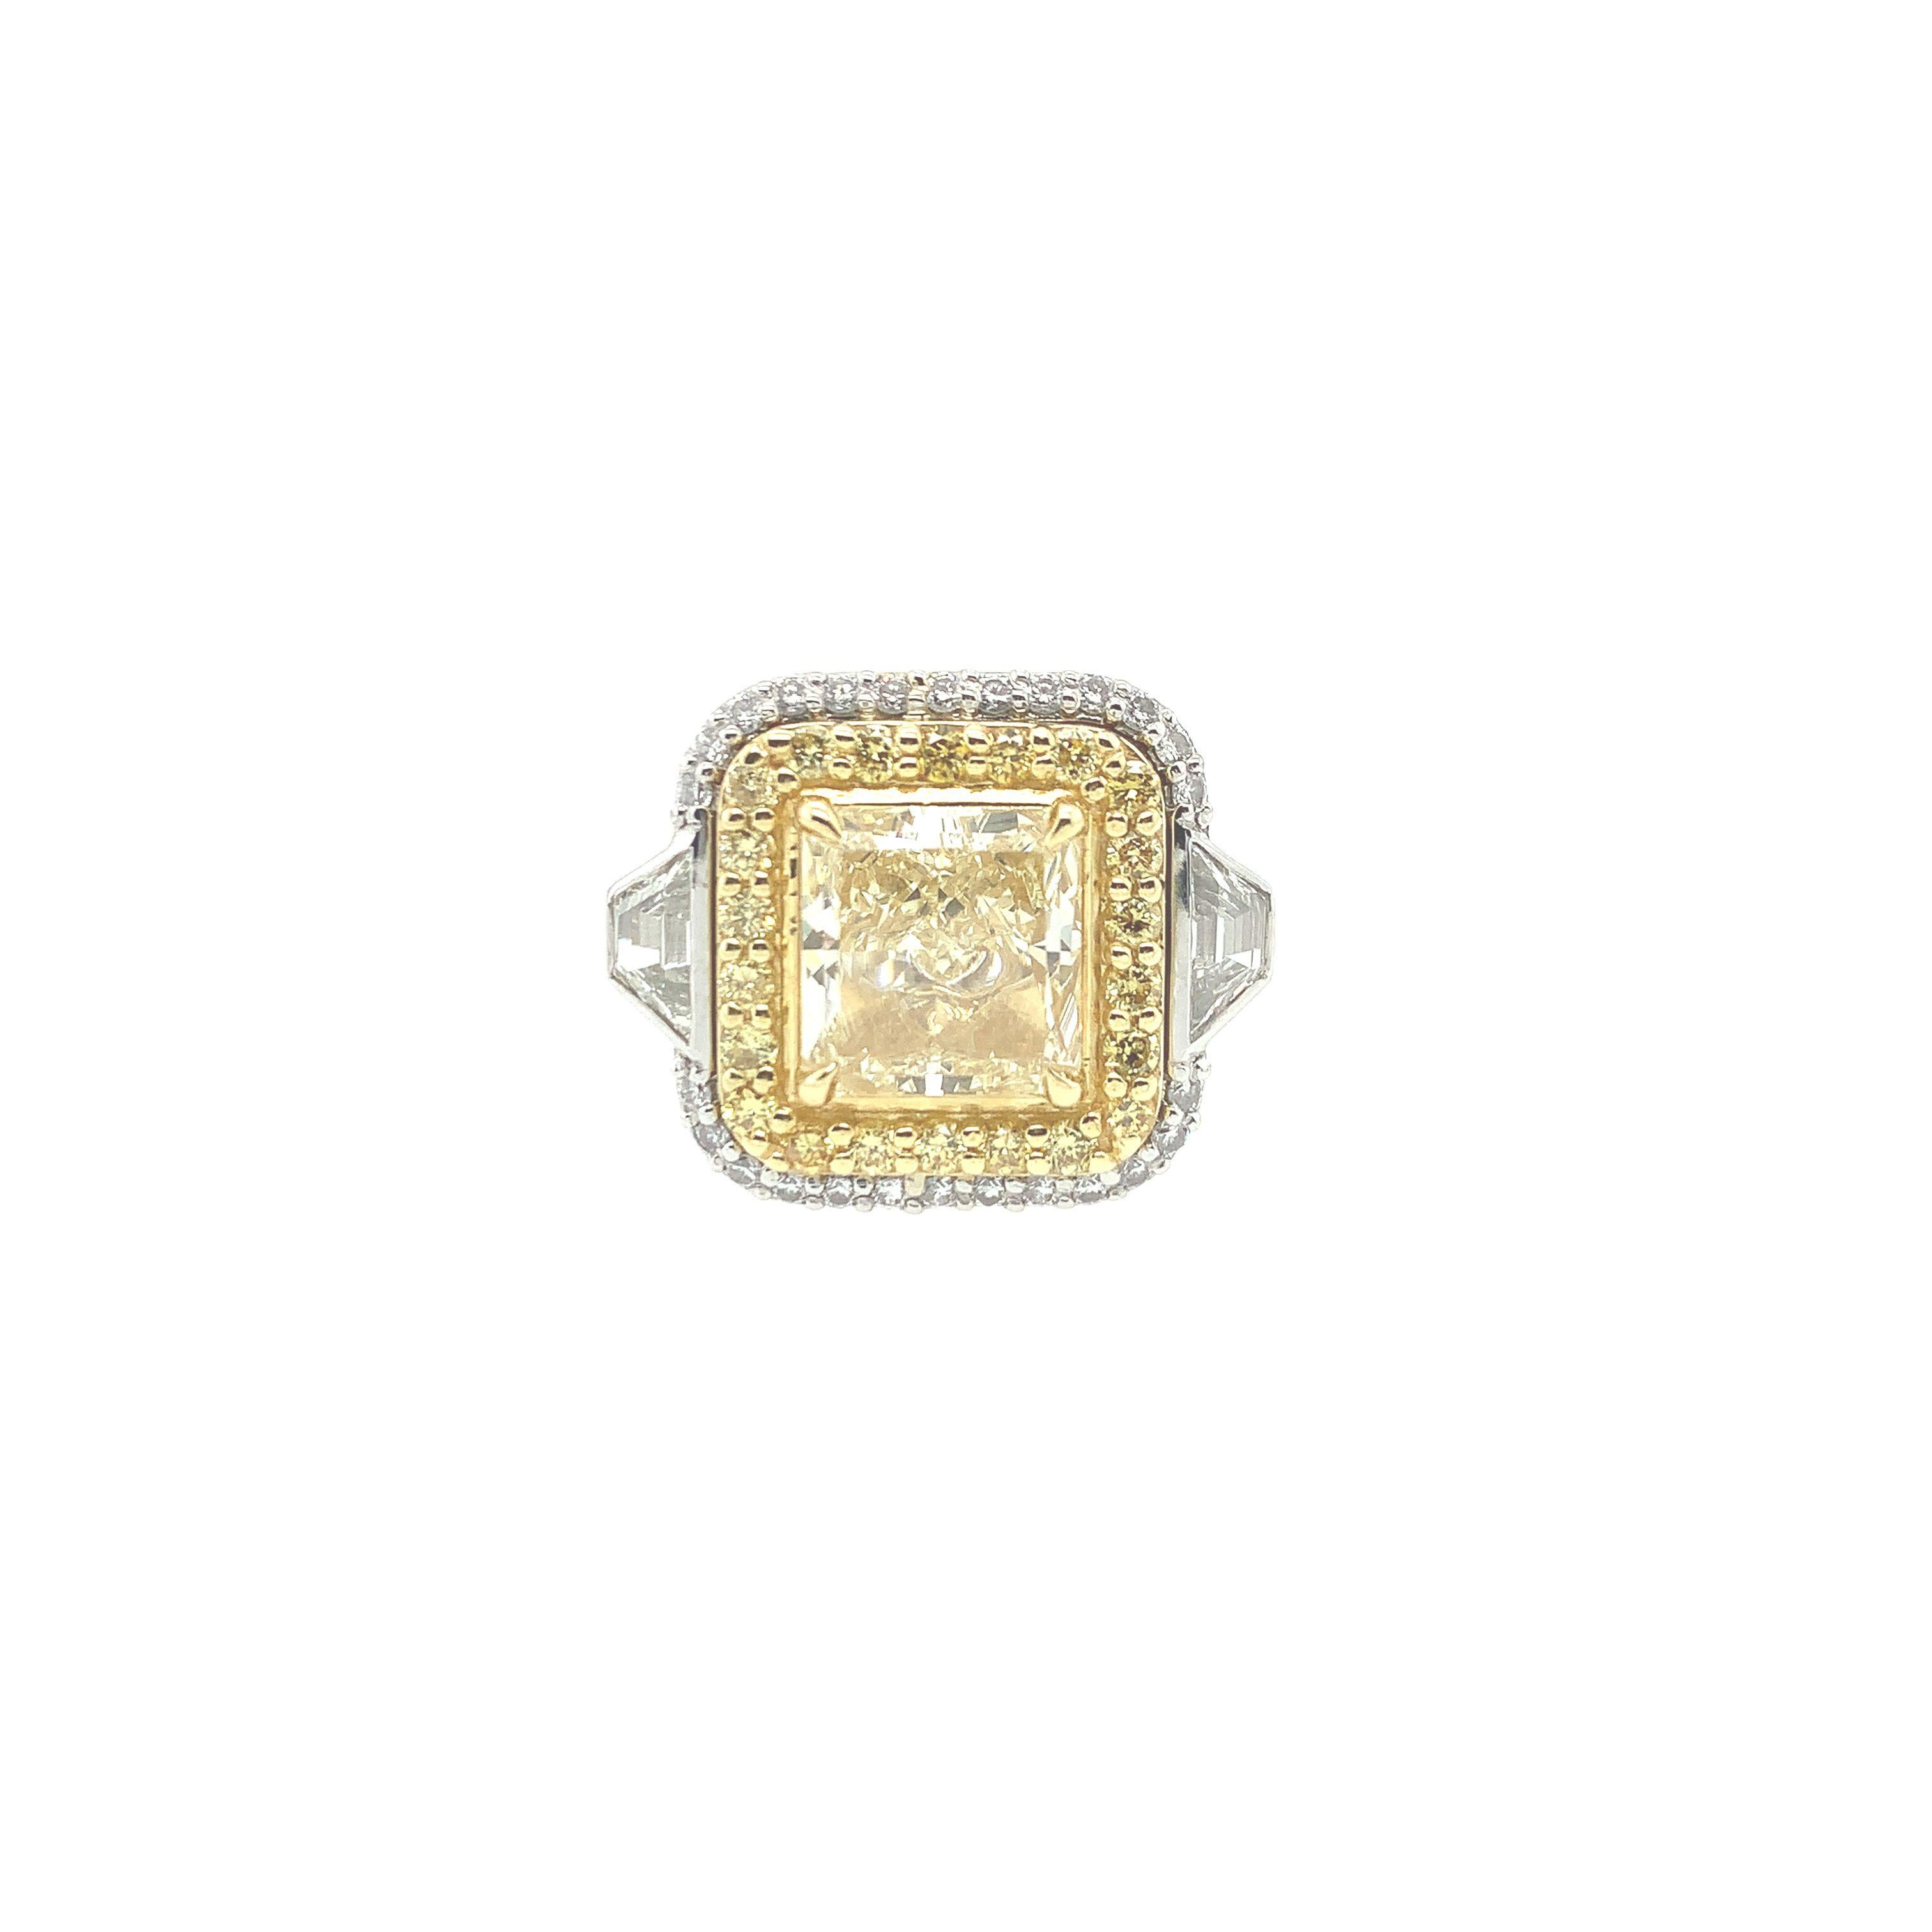 A 3.46 carat fancy yellow diamond is the focal point of this exquisite ring. At its center, this fancy yellow radiant cut diamond measures 8.78 x 8.53 x 5.08mm, VVS2 Clarity.  This magnificent ring is accented by (2) two trapezoids totaling .69cttw